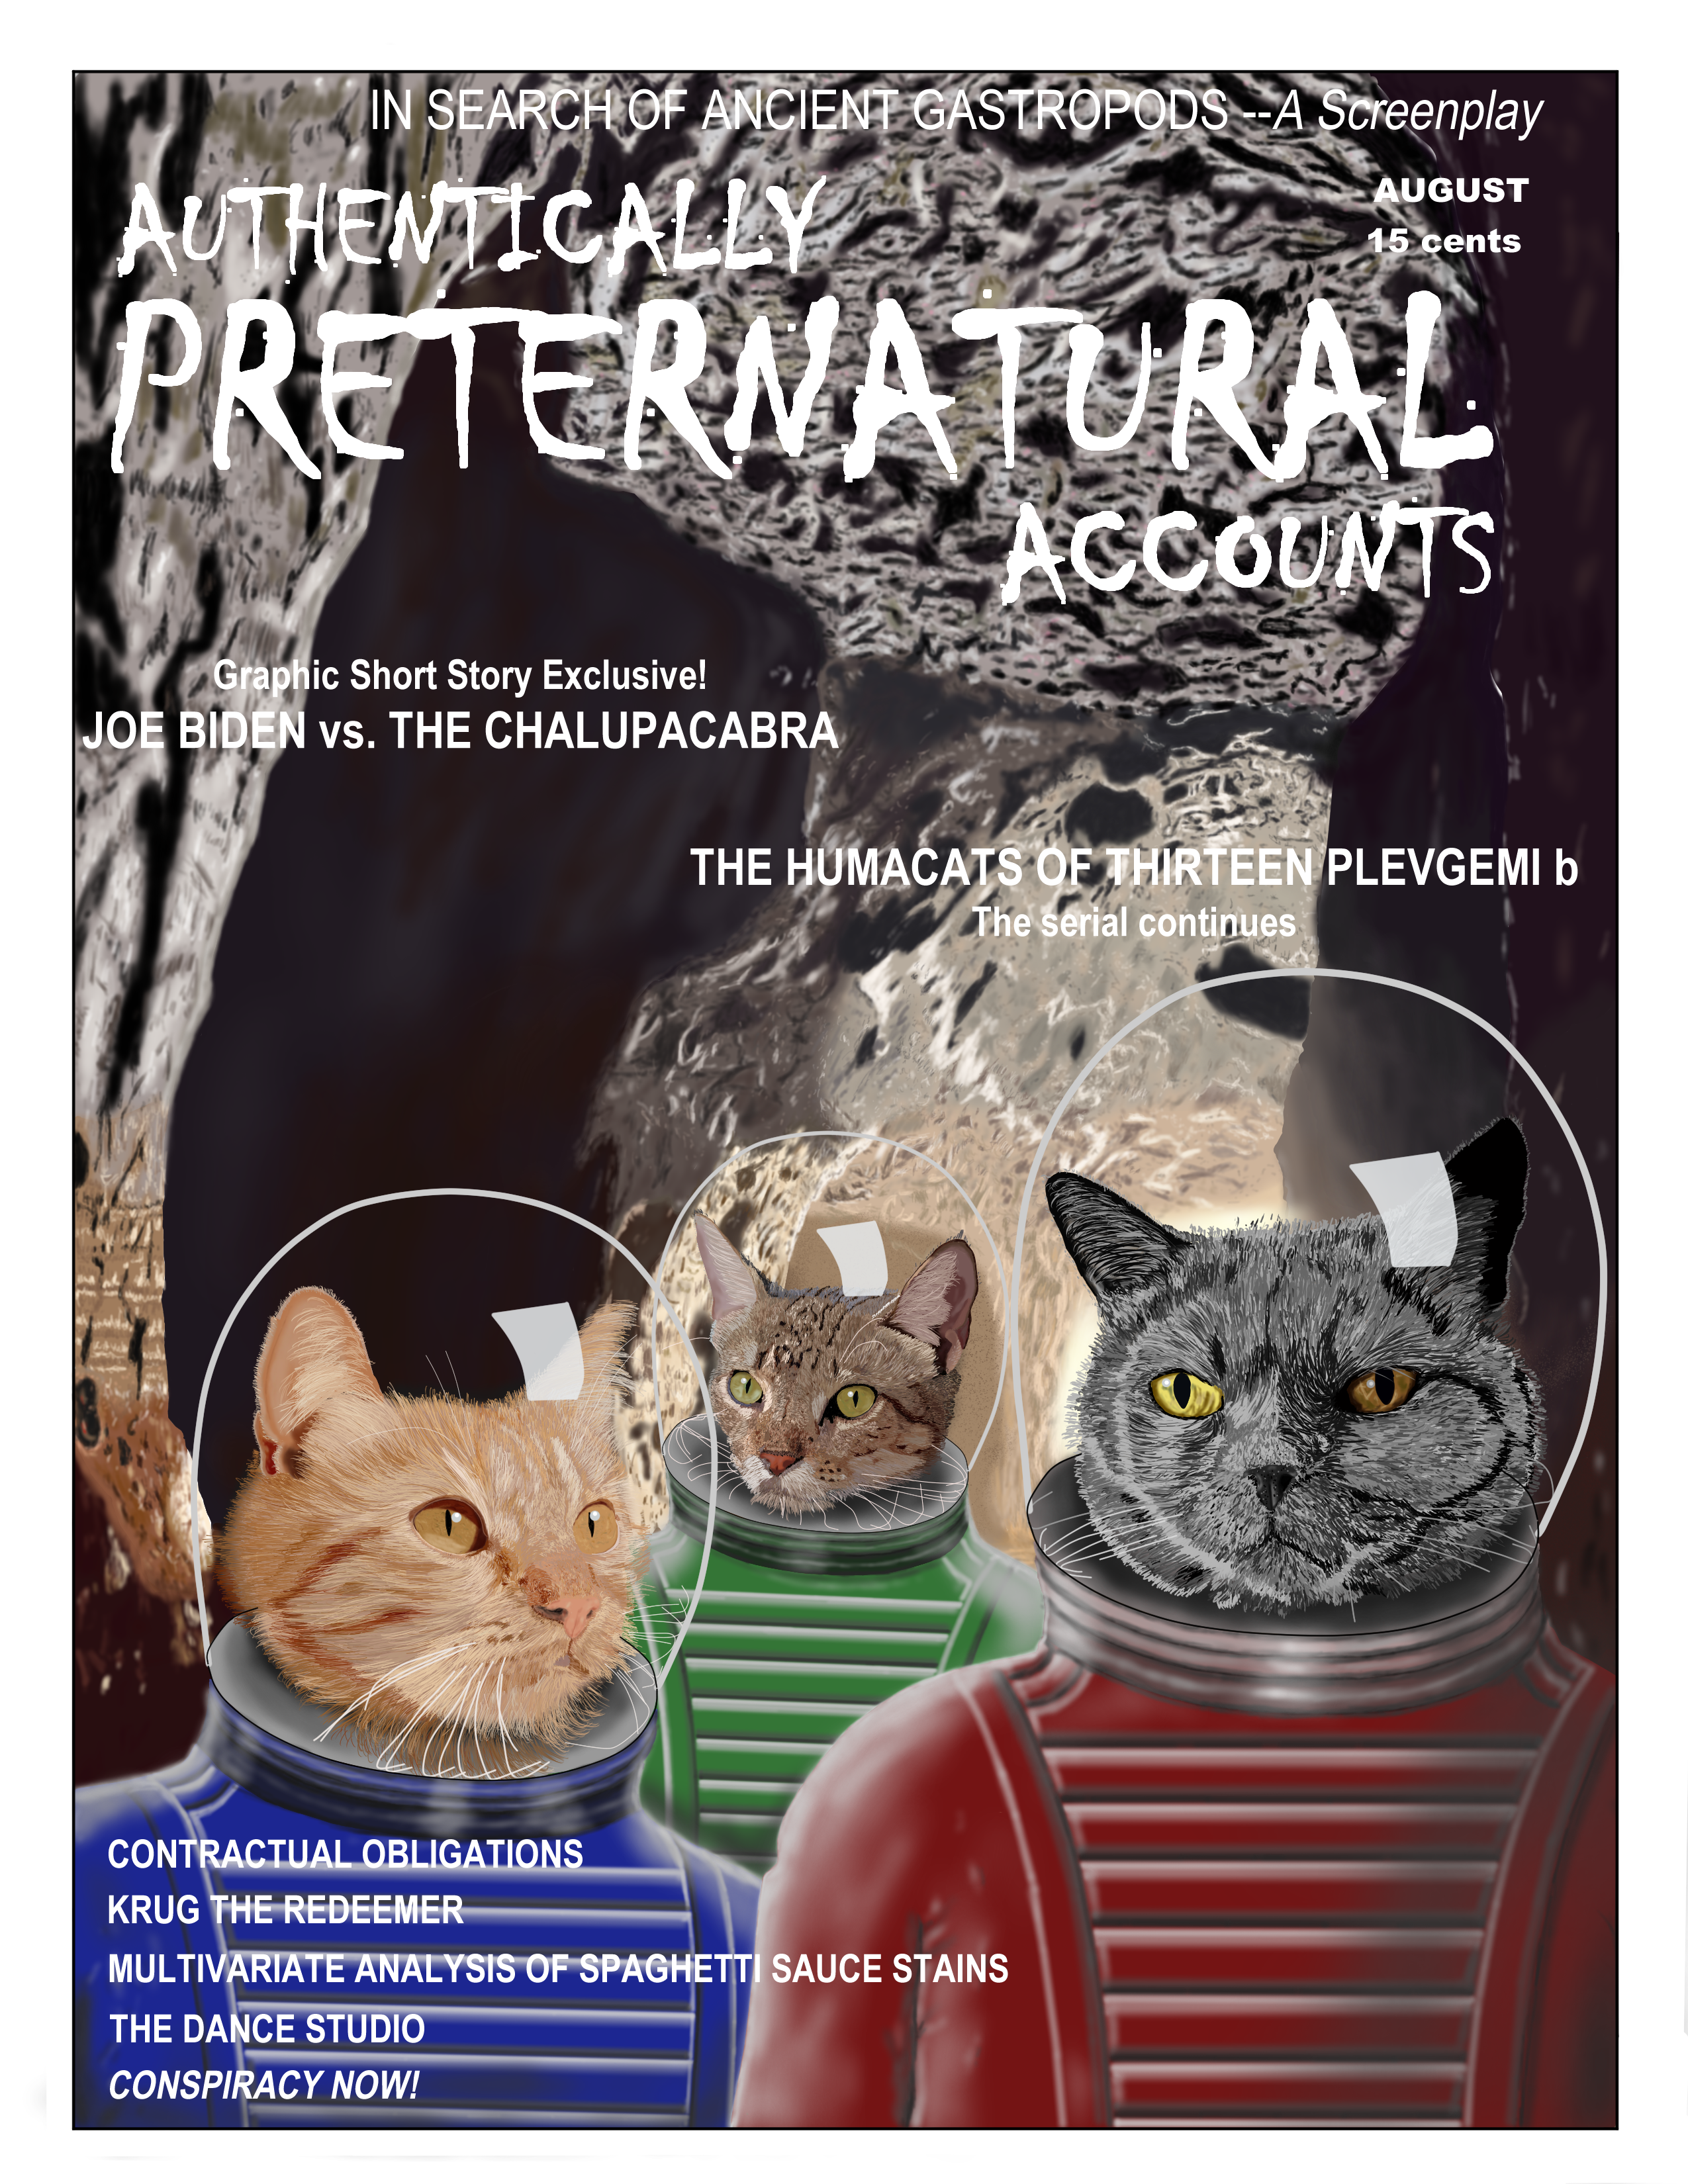 Book cover showing three cats in space suits in the entrance to a cave.